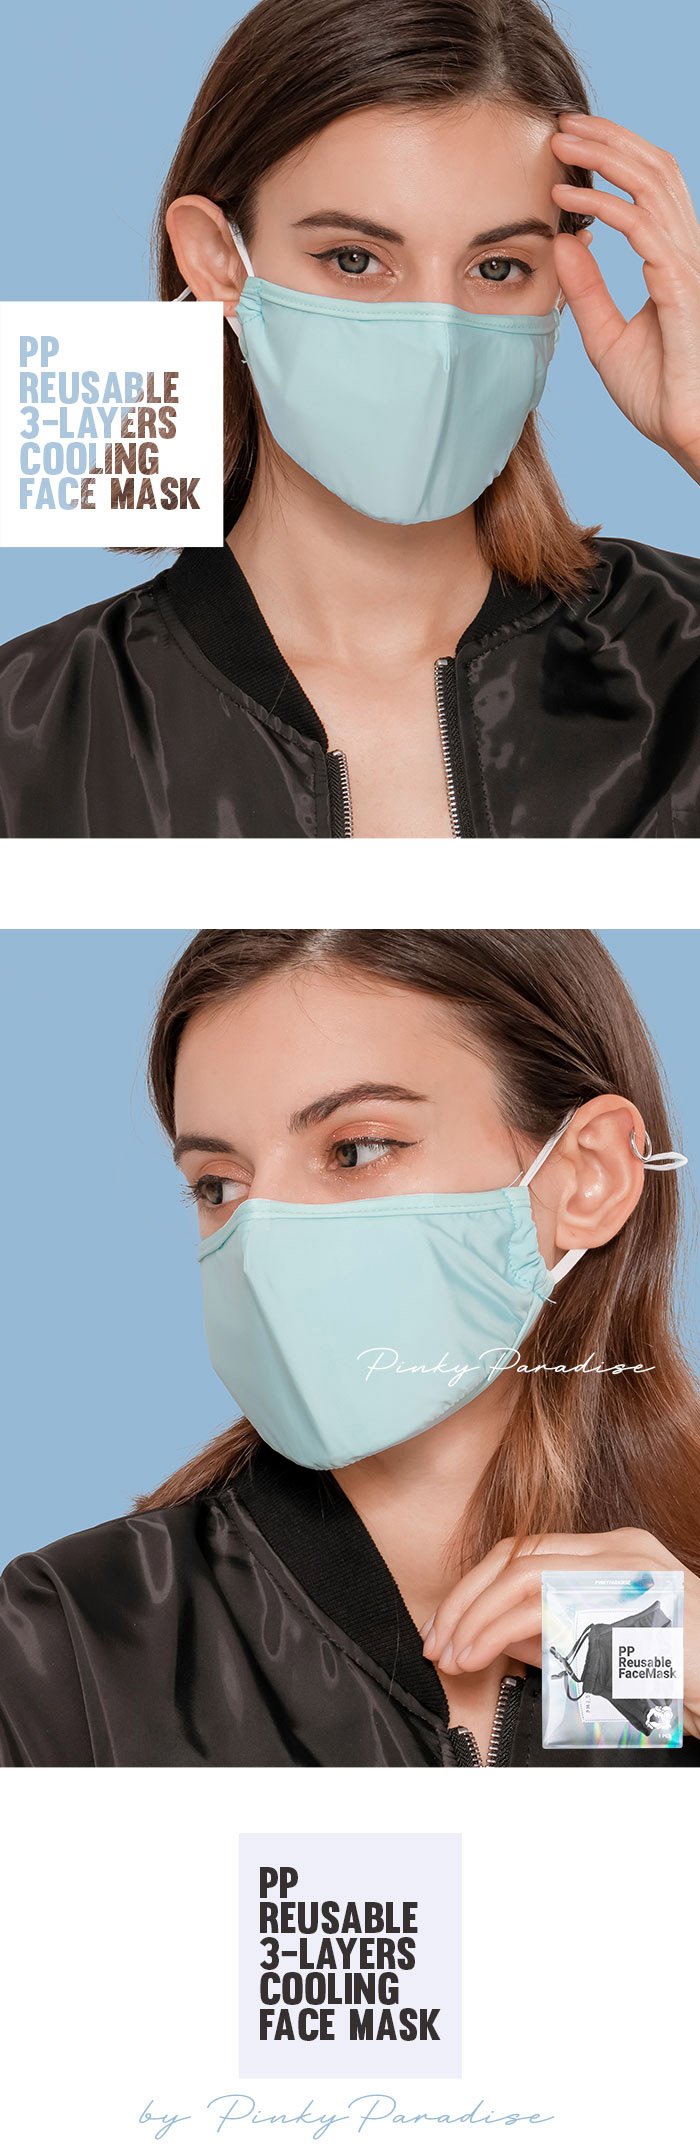 PP Reusable 3 layers Colling Face Mask in blue color